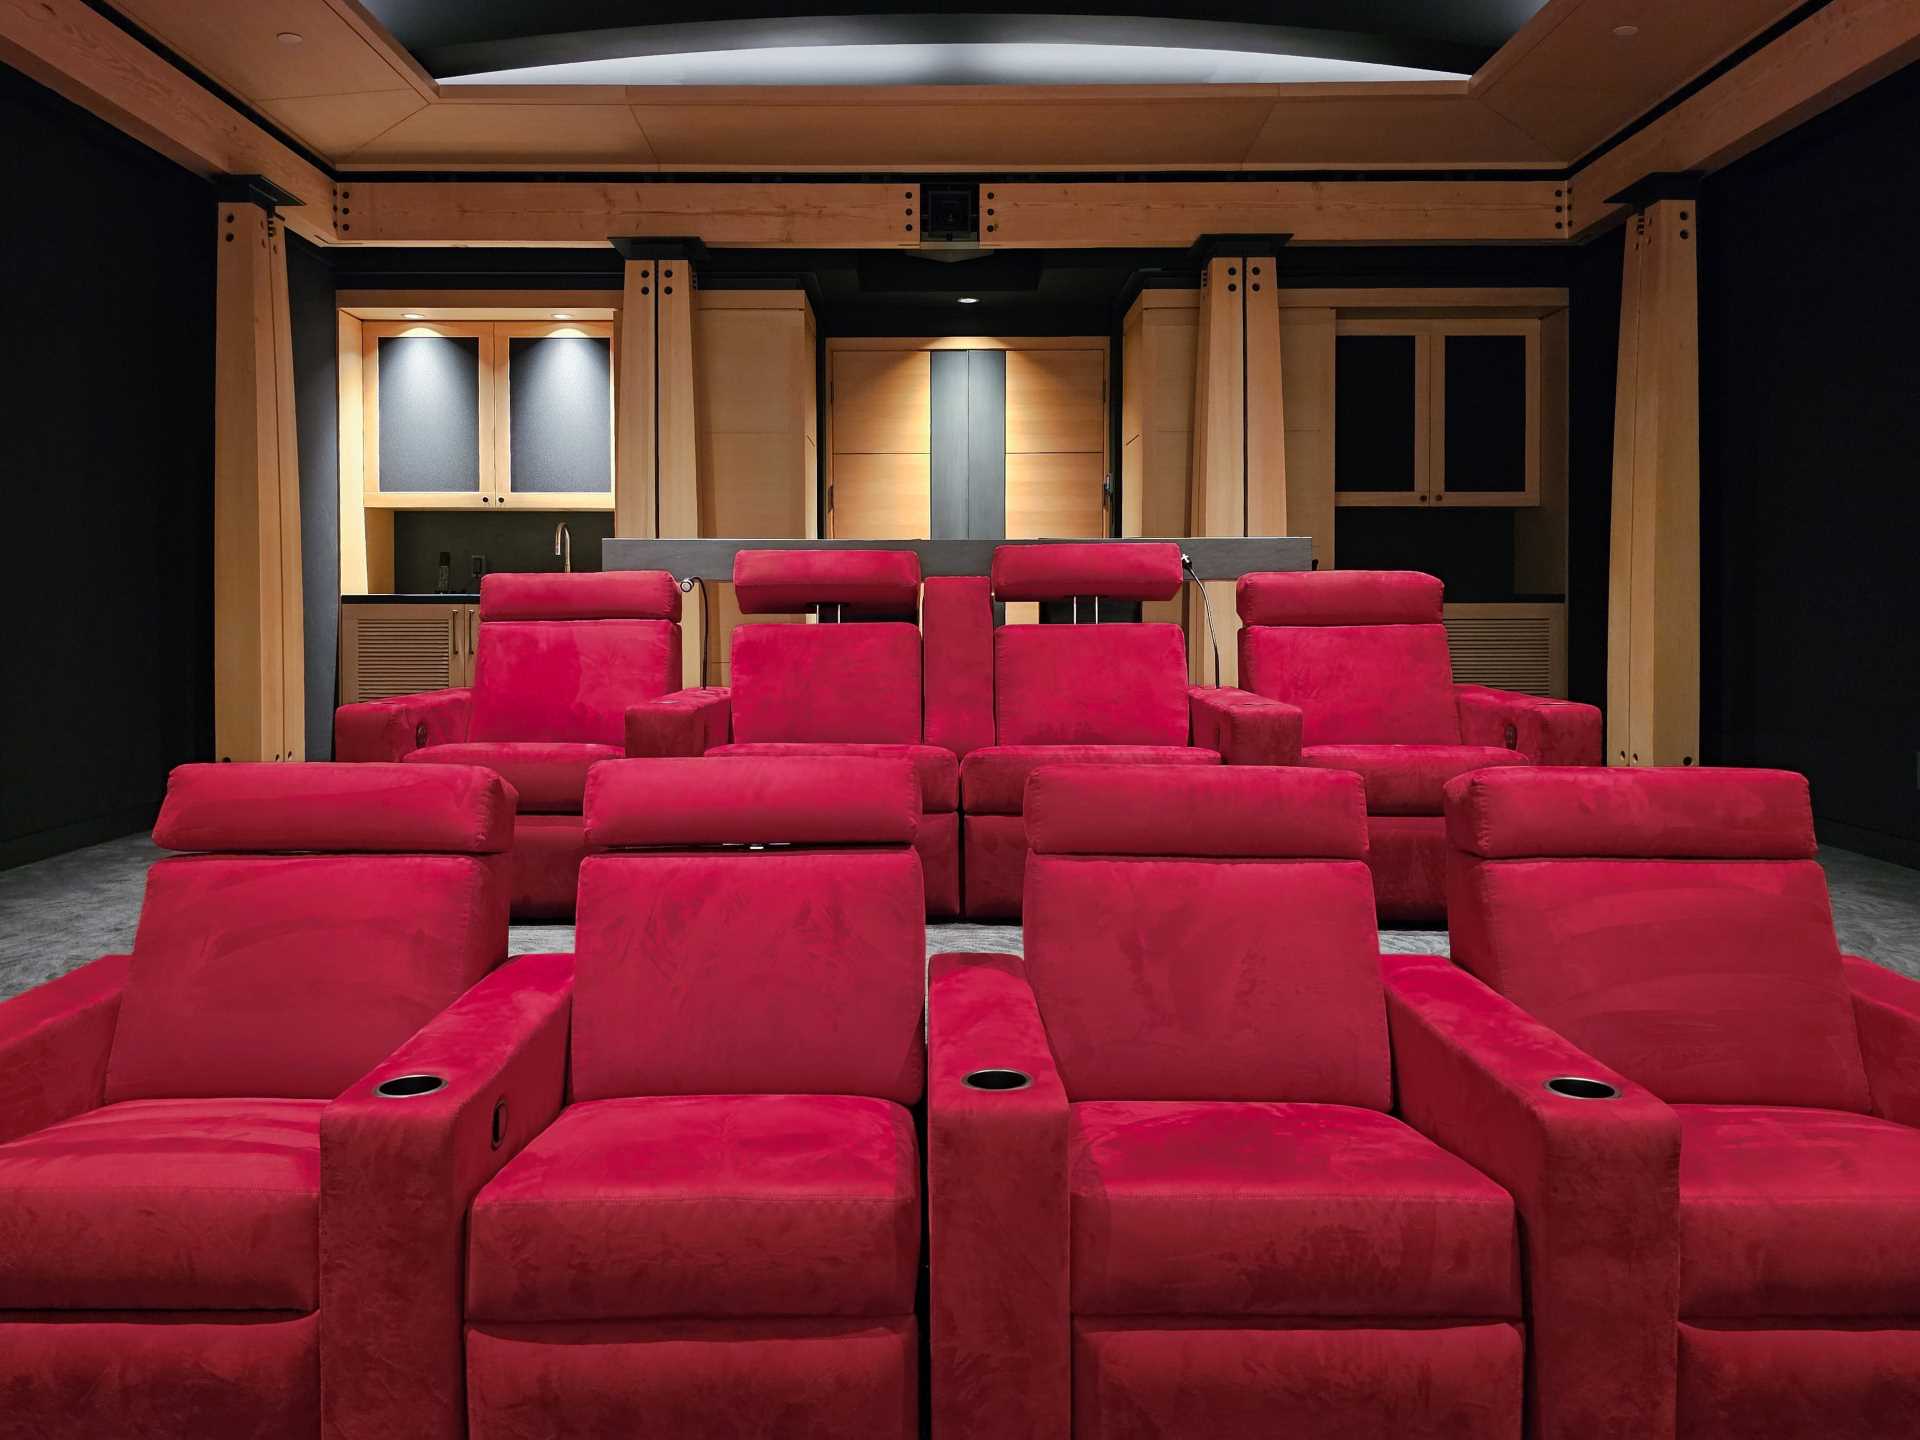 In this home theater, bright red chairs add a pop of colour to the black and wood interior.